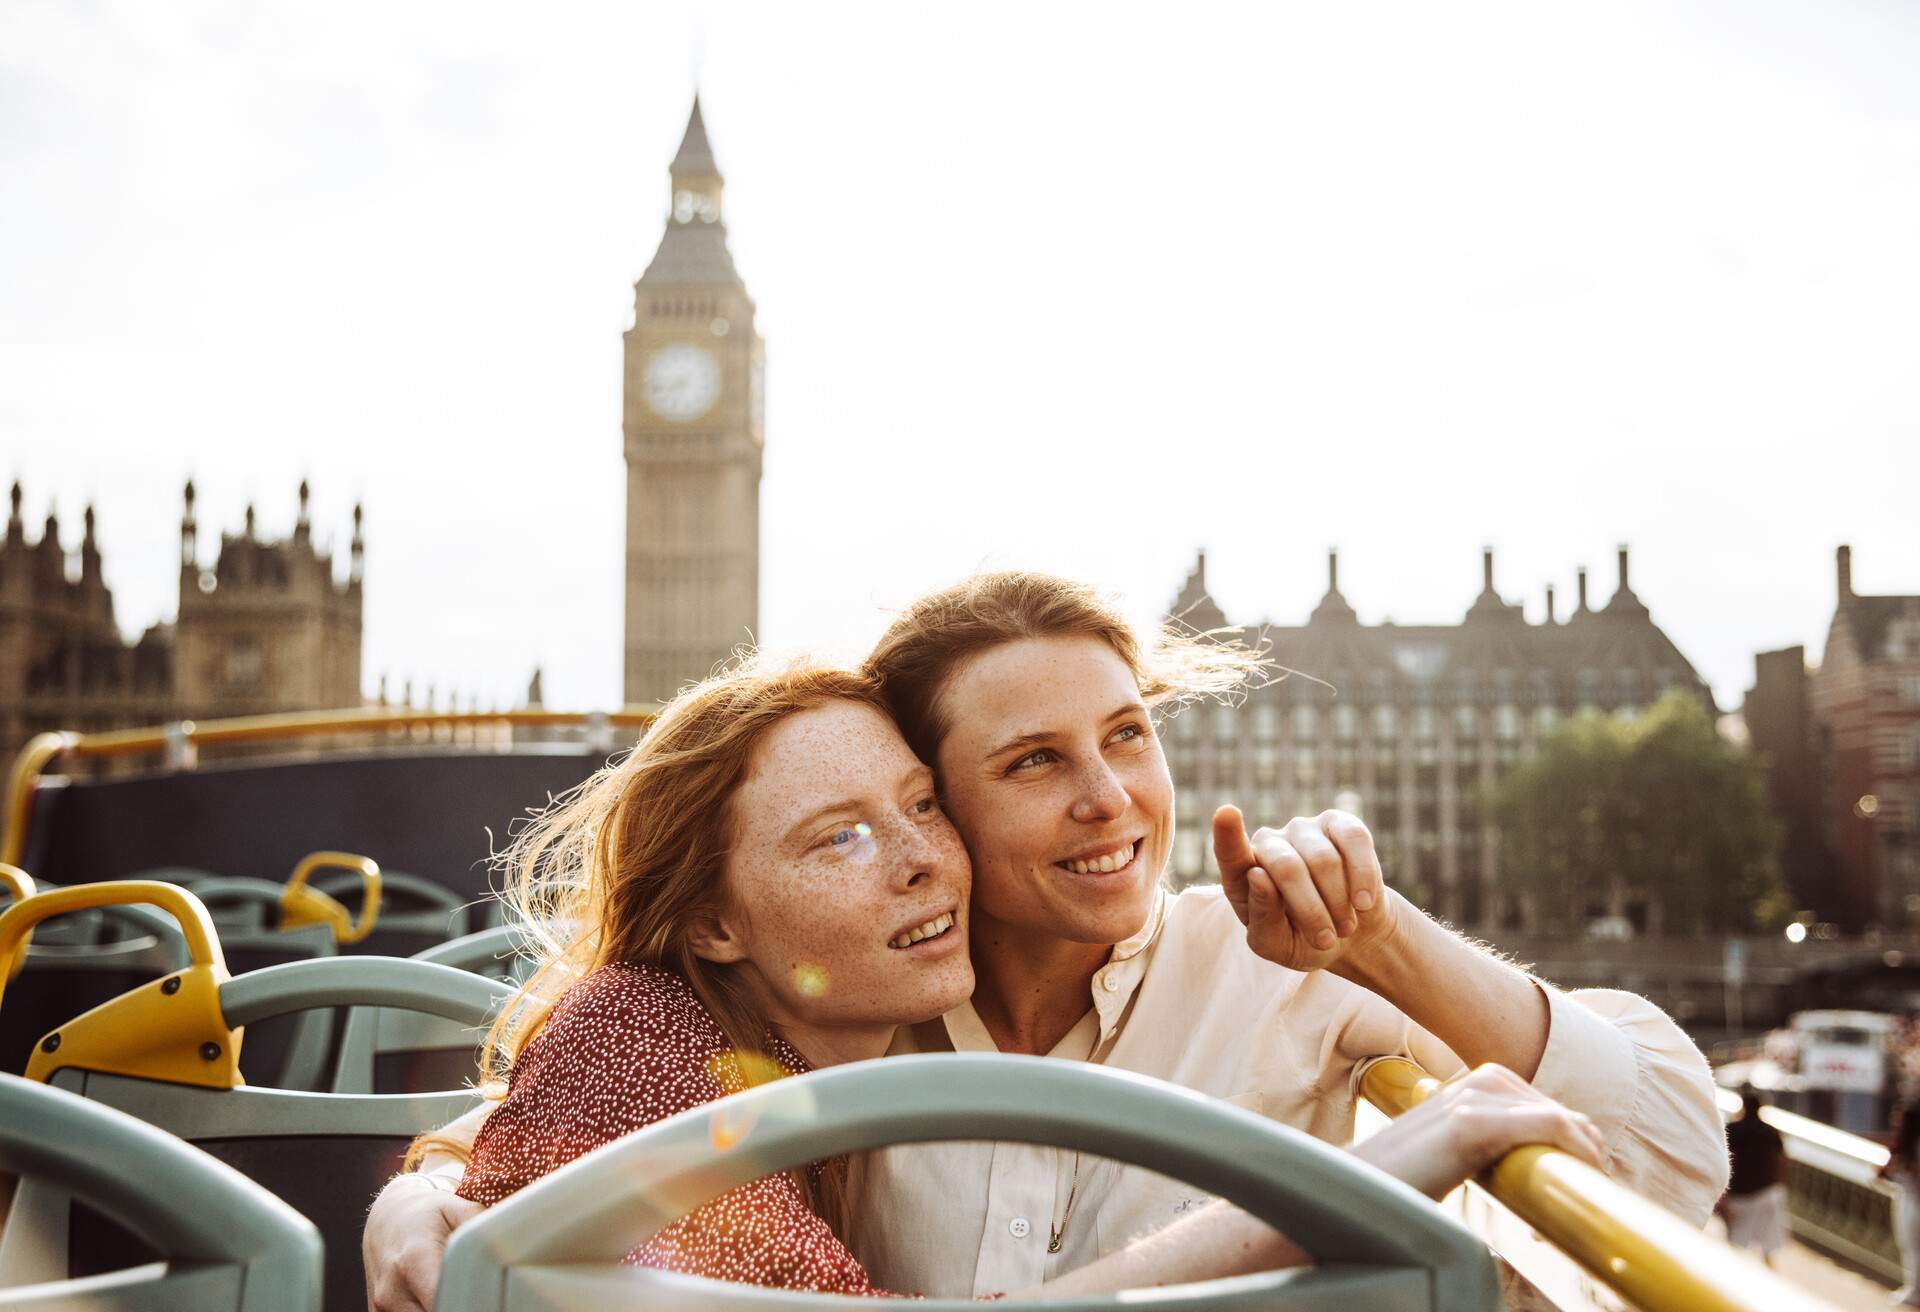 LGBTQ couple on open top bus in London, England, United Kingdom